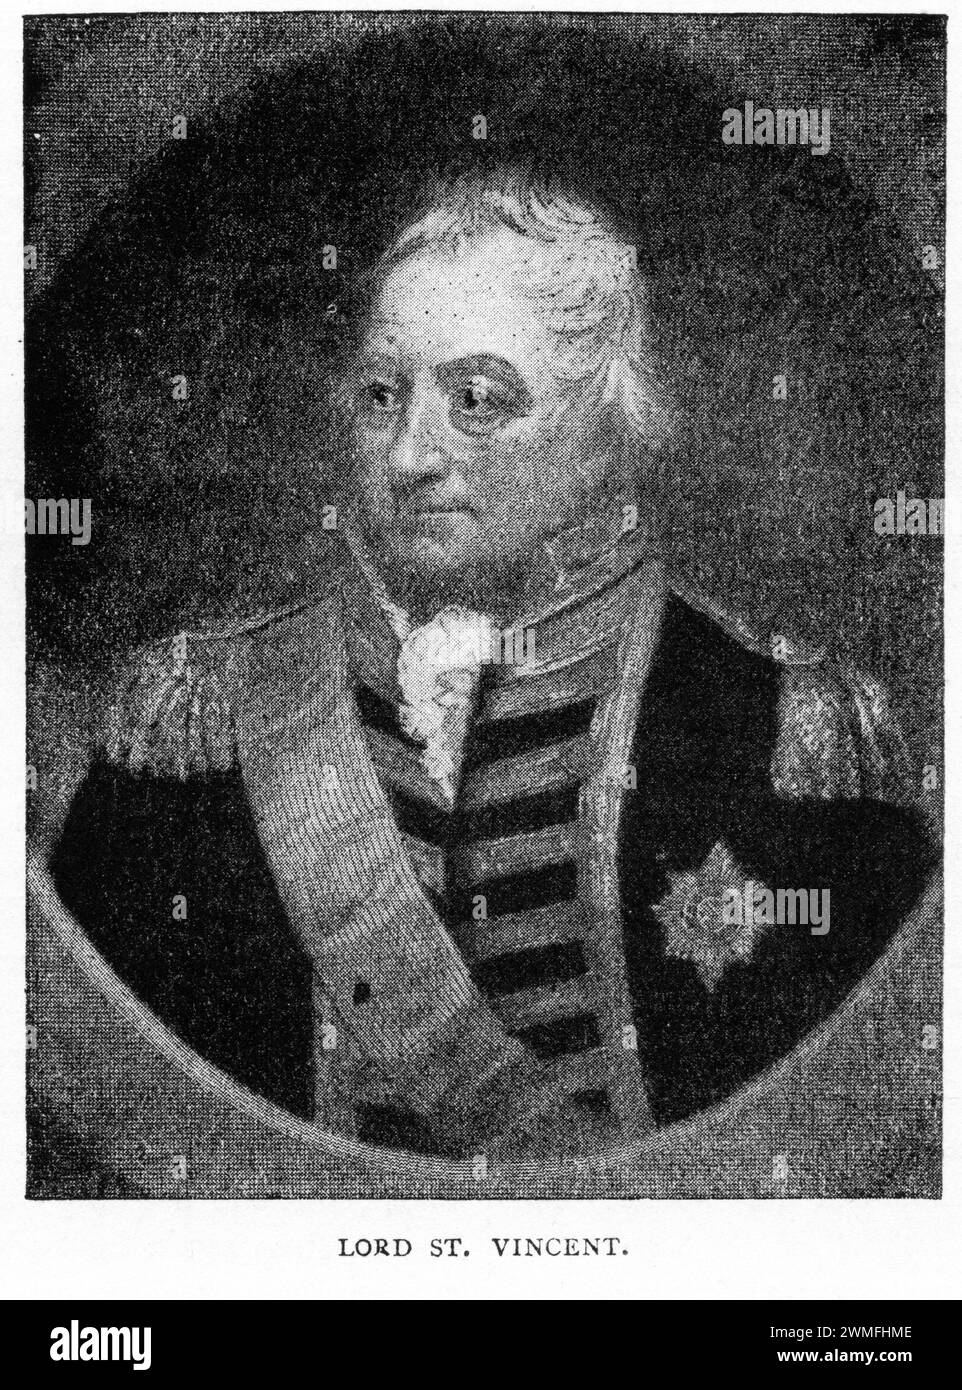 Portrait of Admiral of the Fleet John Jervis, 1st Earl of St Vincent  (1735 – 1823)  an admiral in the Royal Navy and Member of Parliament in the United Kingdom. Jervis served throughout the latter half of the 18th century and into the 19th, and was an active commander during the Seven Years' War, American War of Independence, French Revolutionary War and the Napoleonic Wars. He is best known for his victory at the 1797 Battle of Cape Saint Vincent, from which he earned his titles, and as a patron of Horatio Nelson. Stock Photo